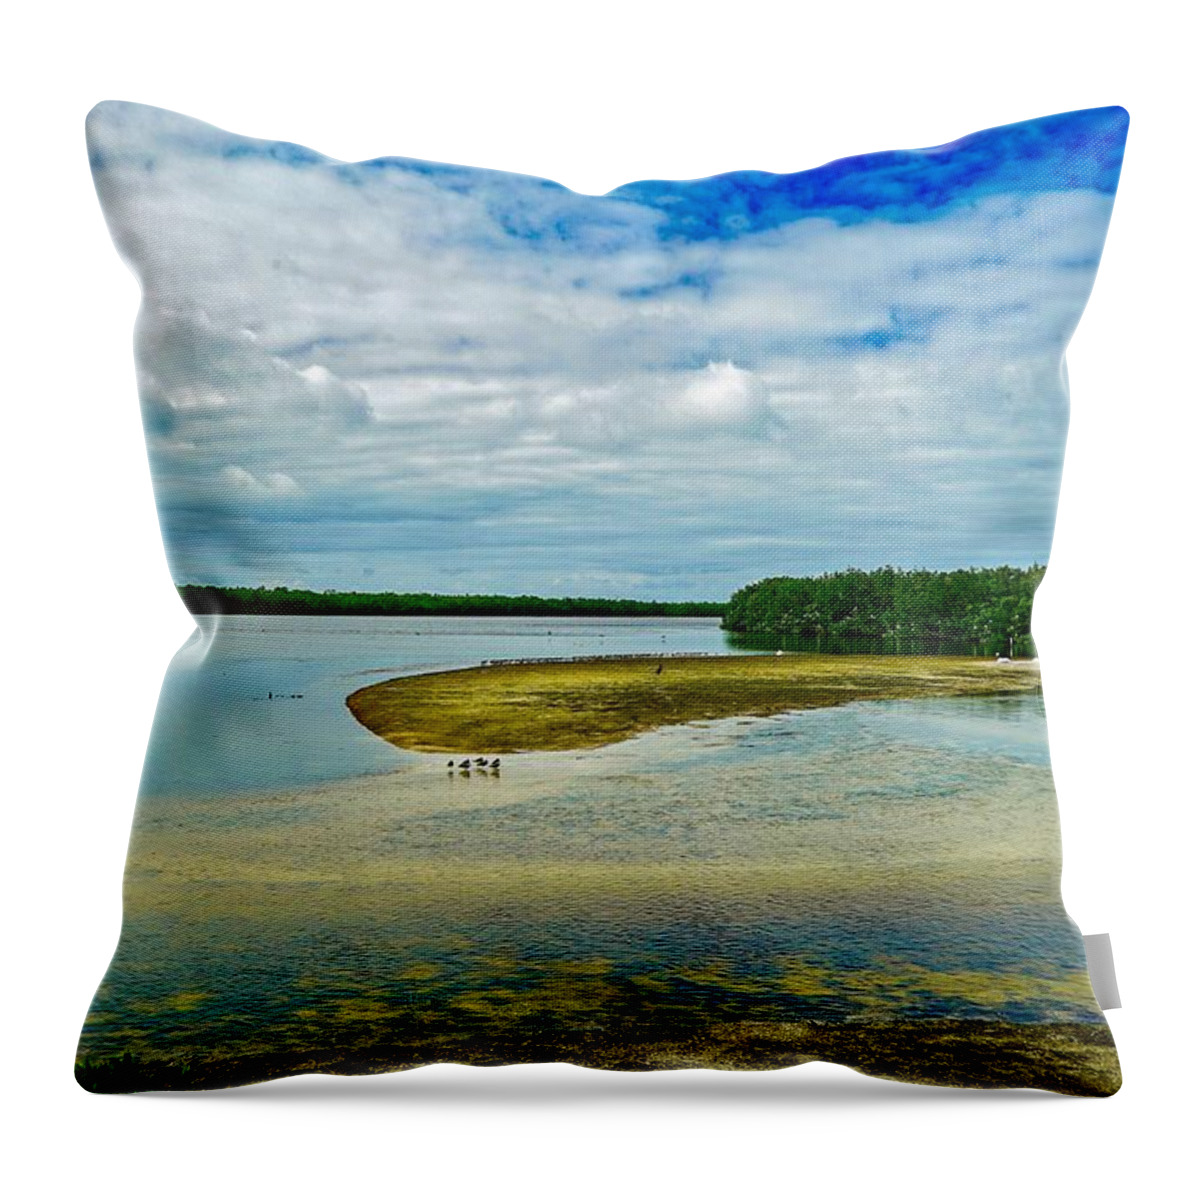 Lake Throw Pillow featuring the photograph Wildlife Refuge On Sanibel Island #1 by Susan Rydberg